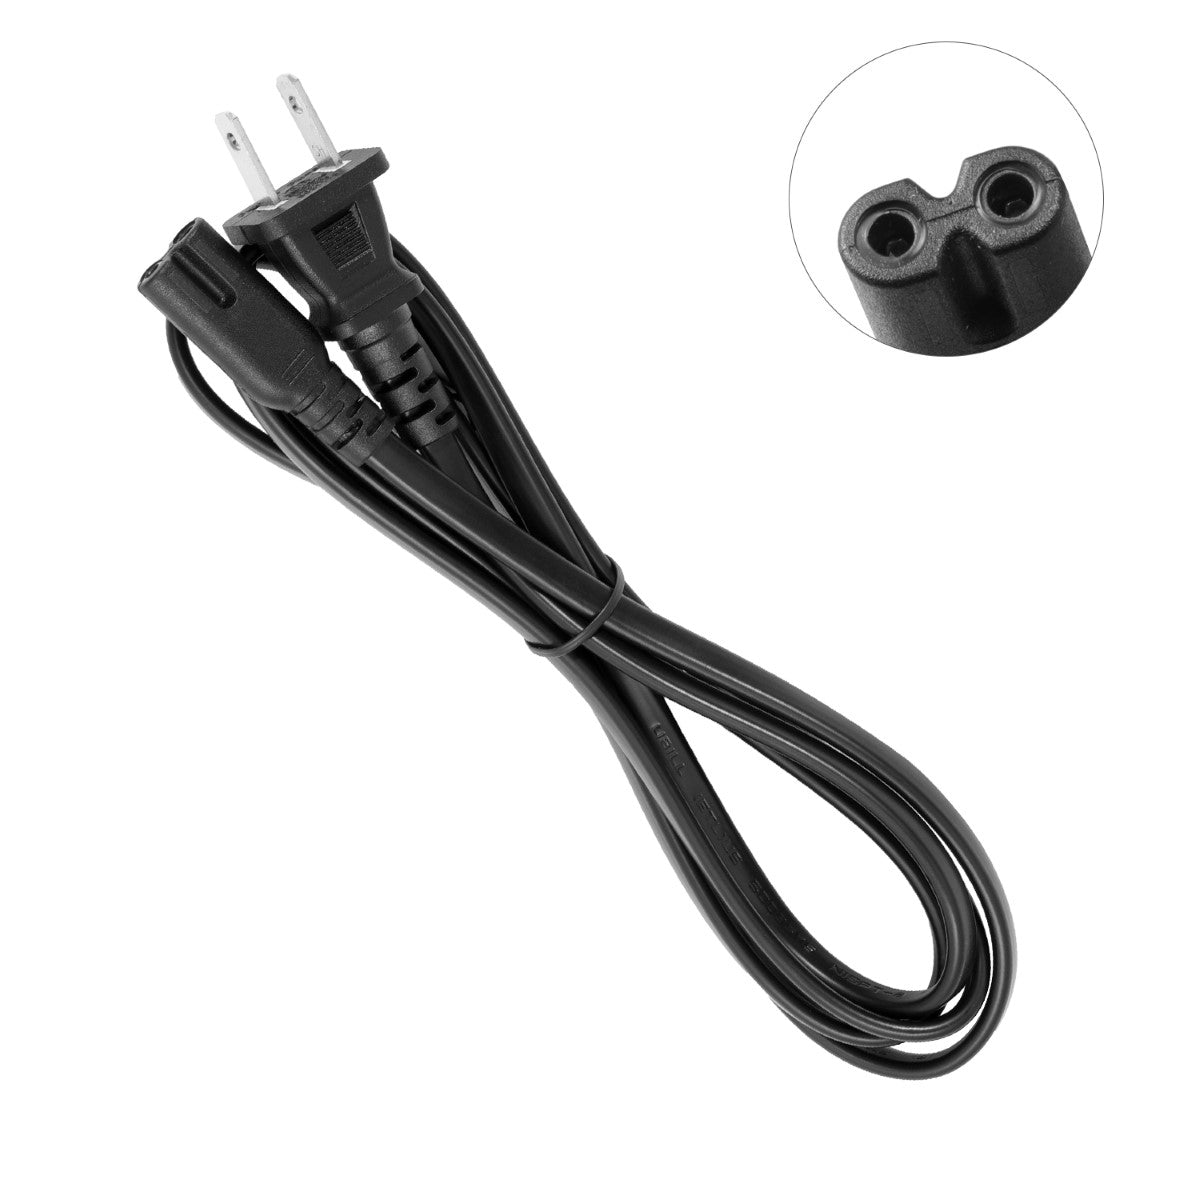 Power Cord for HP ENVY 4504 e-All-in-One Printer.